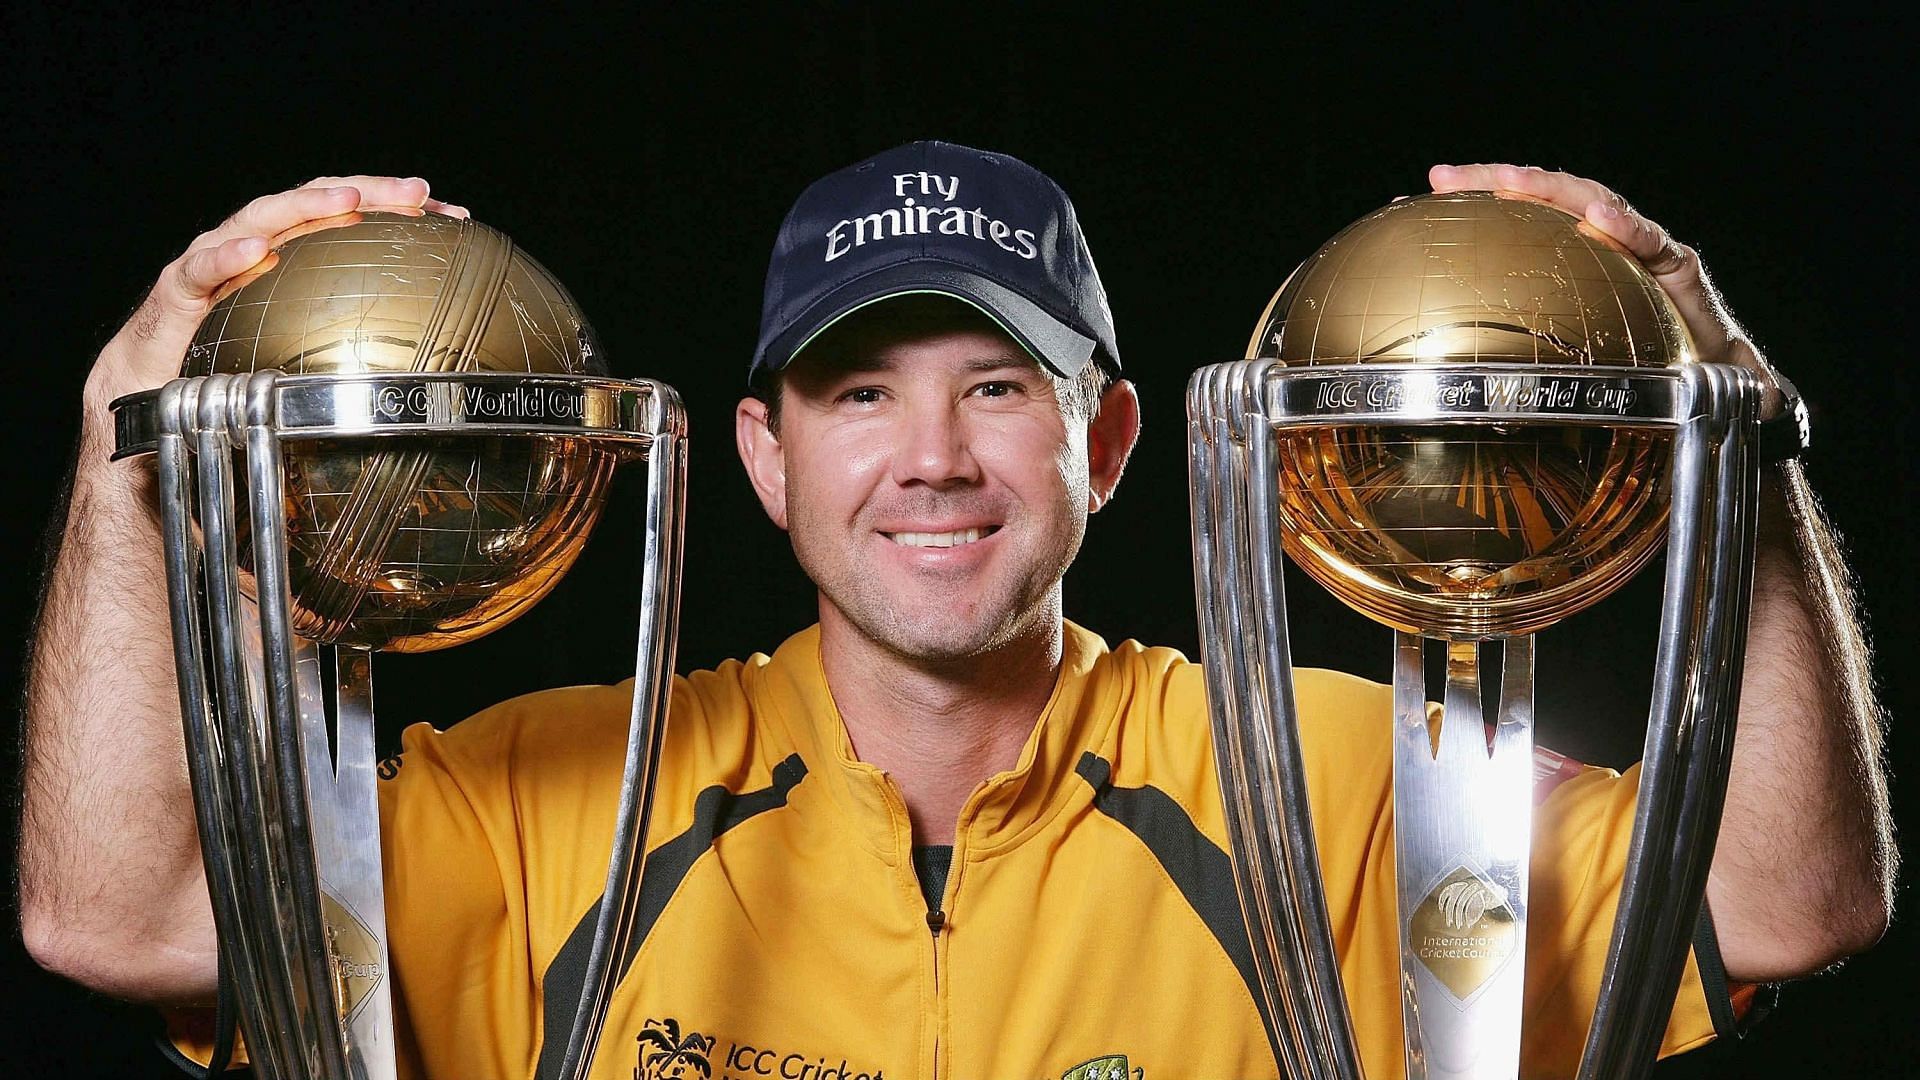 Ricky Ponting has won two ODI World Cups as captain (Image via Getty)